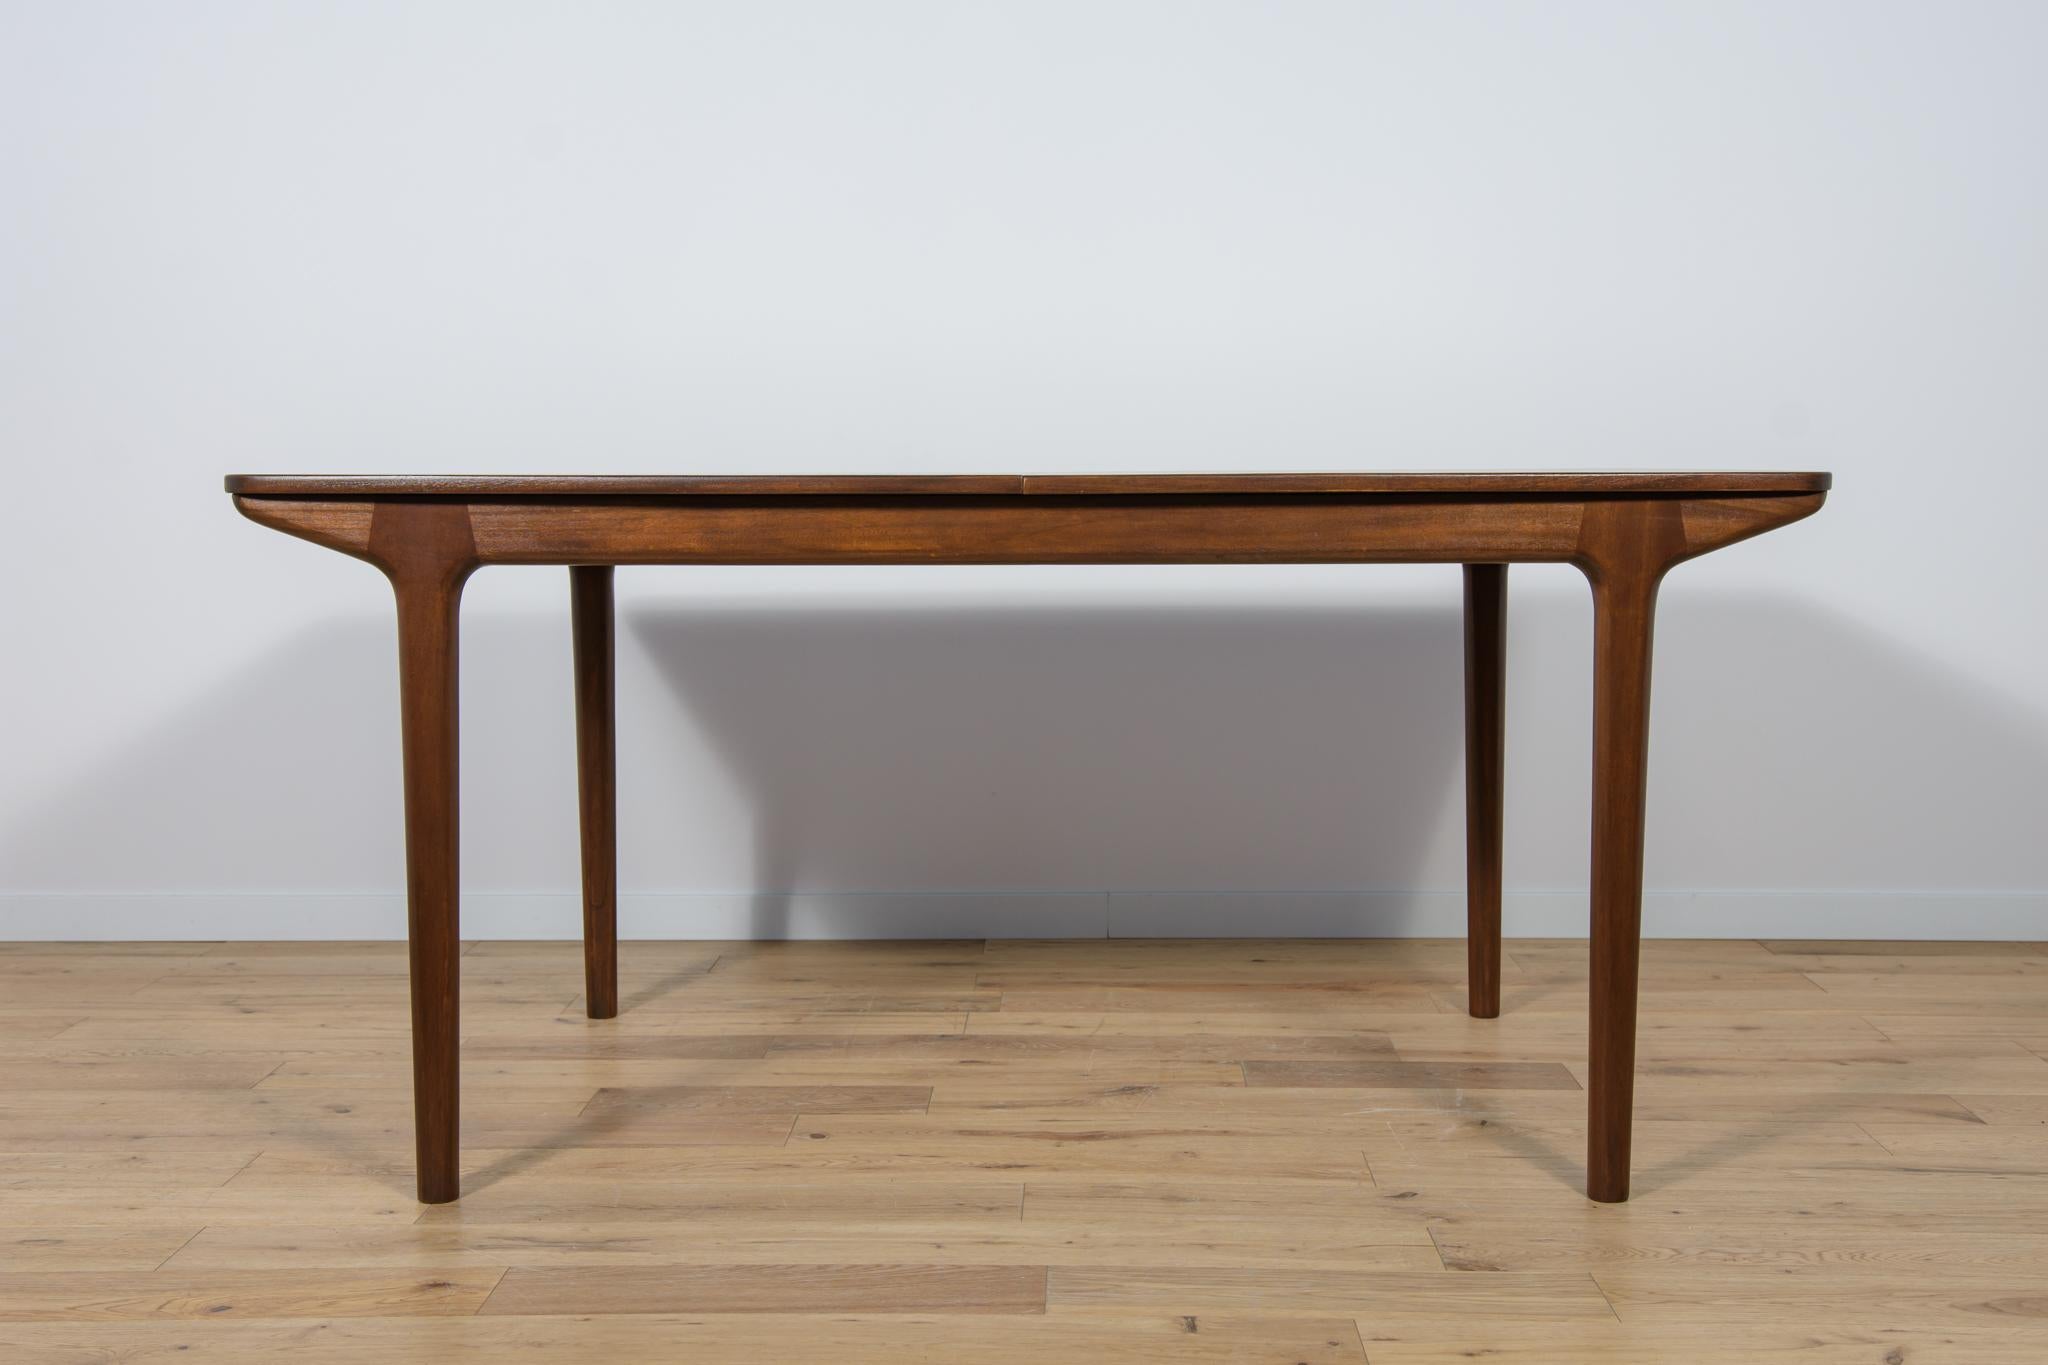 A rare model of a rectangular table with two mechanically opened extensions, made of teak wood by the British McIntosh manufactory in the 1960s. The table has undergone a thorough renovation, cleaned of the old coating, painted ed with rosewood